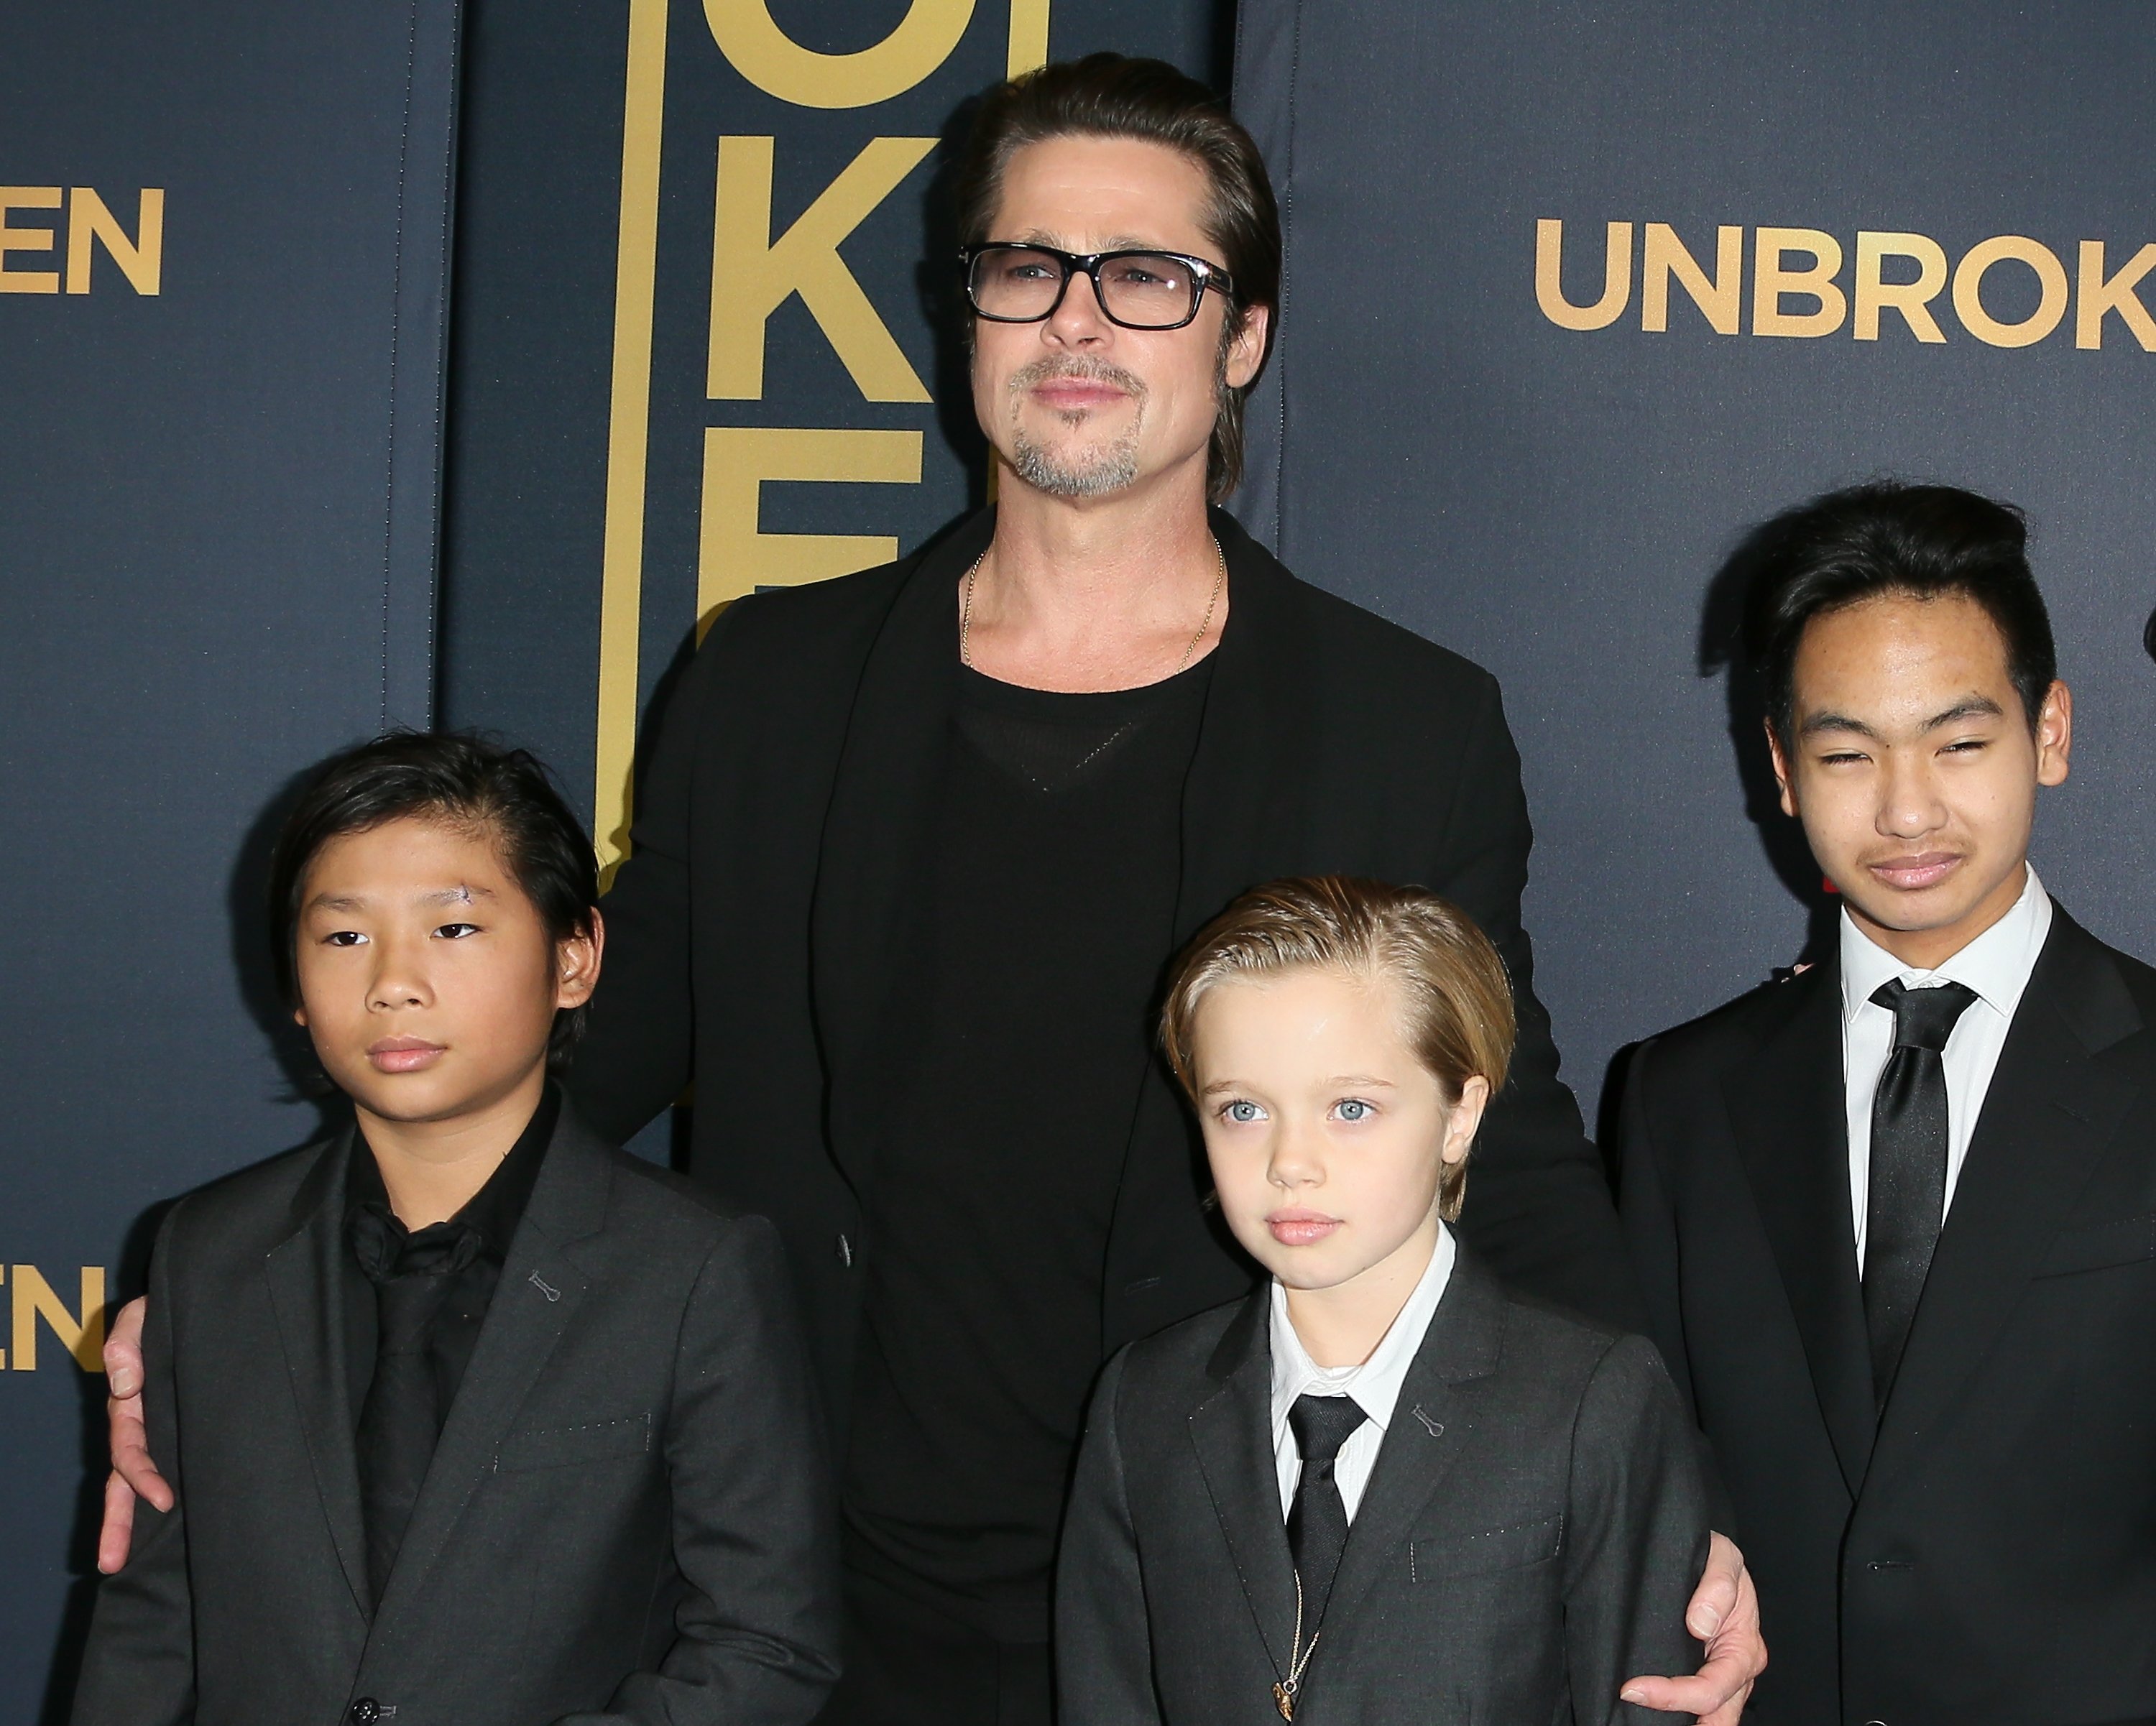 Brad Pitt, Pax Thien Jolie-Pitt, Shiloh Nouvel Jolie-Pitt, and Maddox Jolie-Pitt during the "Unbroken" Los Angeles premiere at the TCL Chinese Theatre IMAX on December 15, 2014, in Hollywood, California. | Source: Getty Images